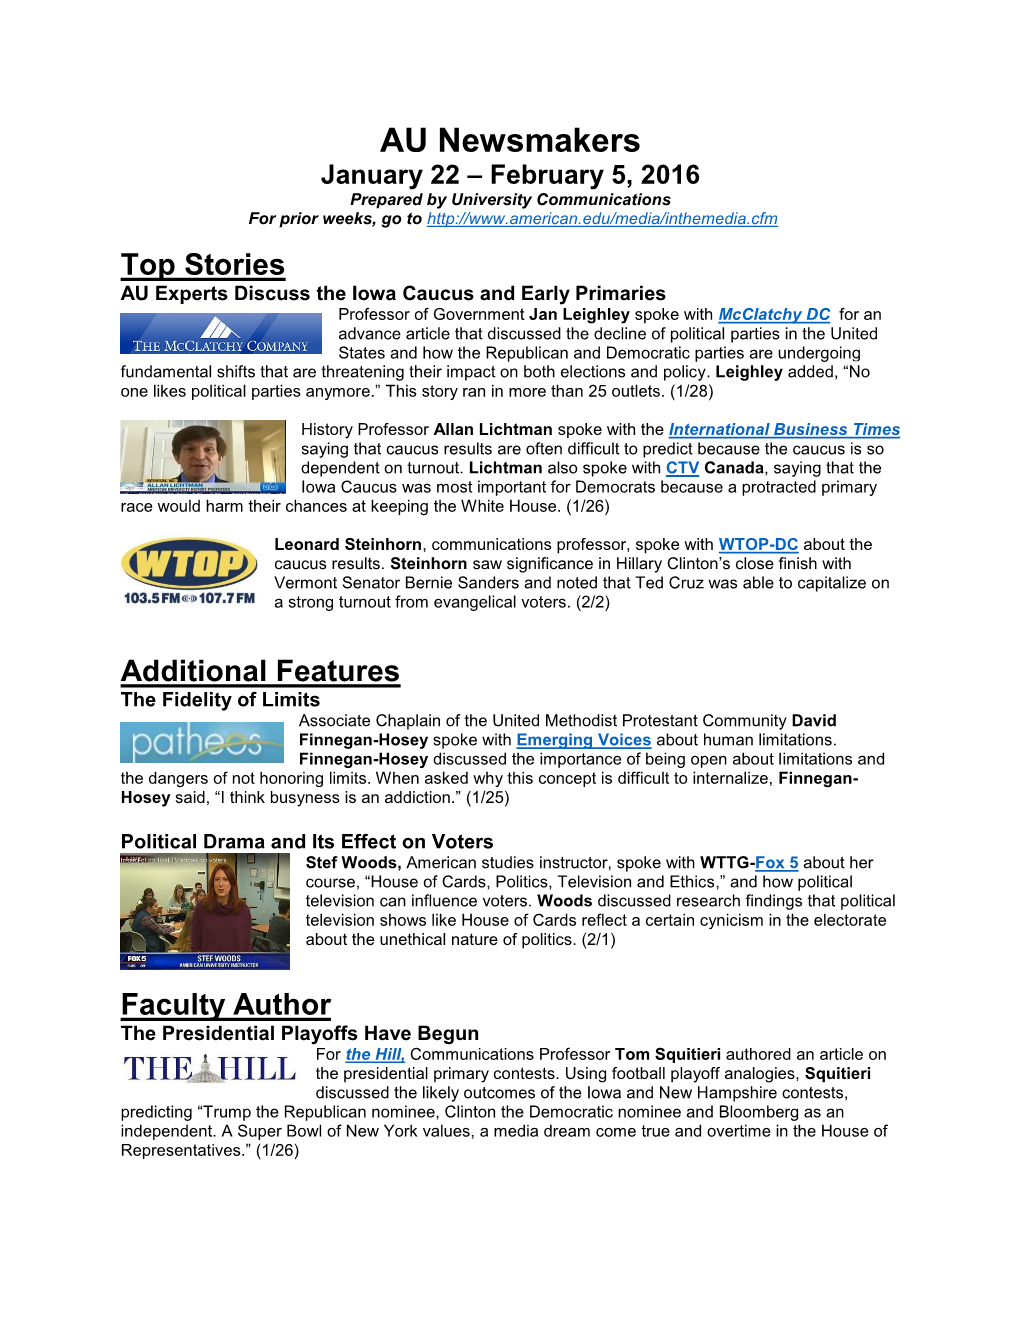 AU Newsmakers January 22 – February 5, 2016 Prepared by University Communications for Prior Weeks, Go To